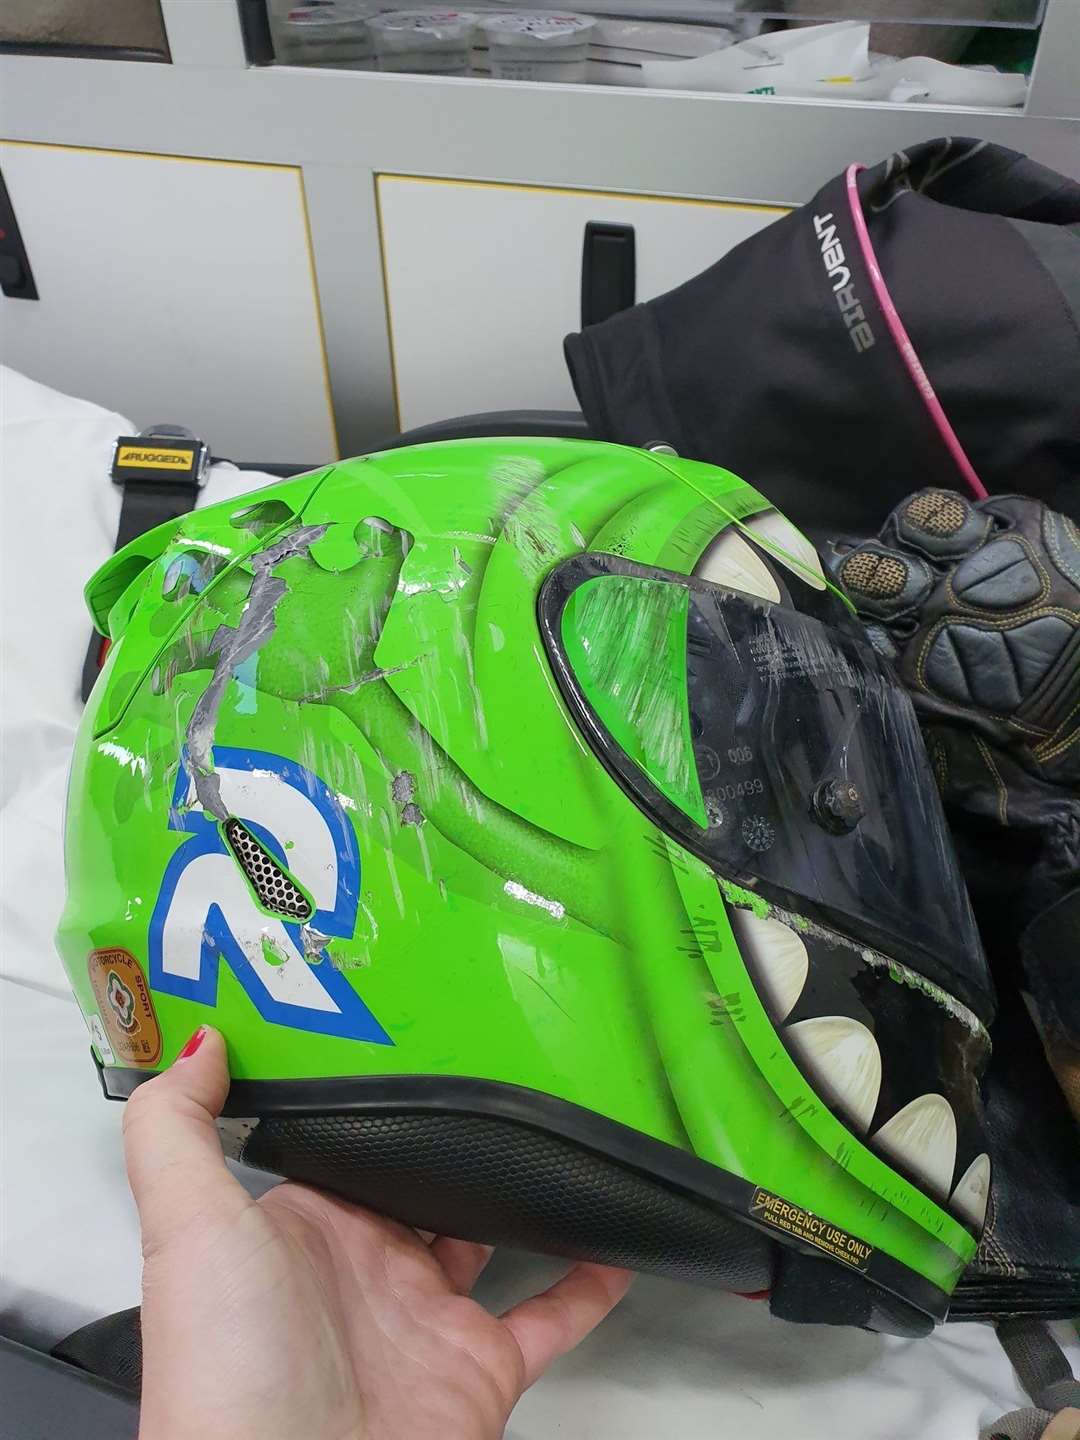 The 33-year-old's favourite Mike Wozowski helmet was damaged in the accident (23531239)